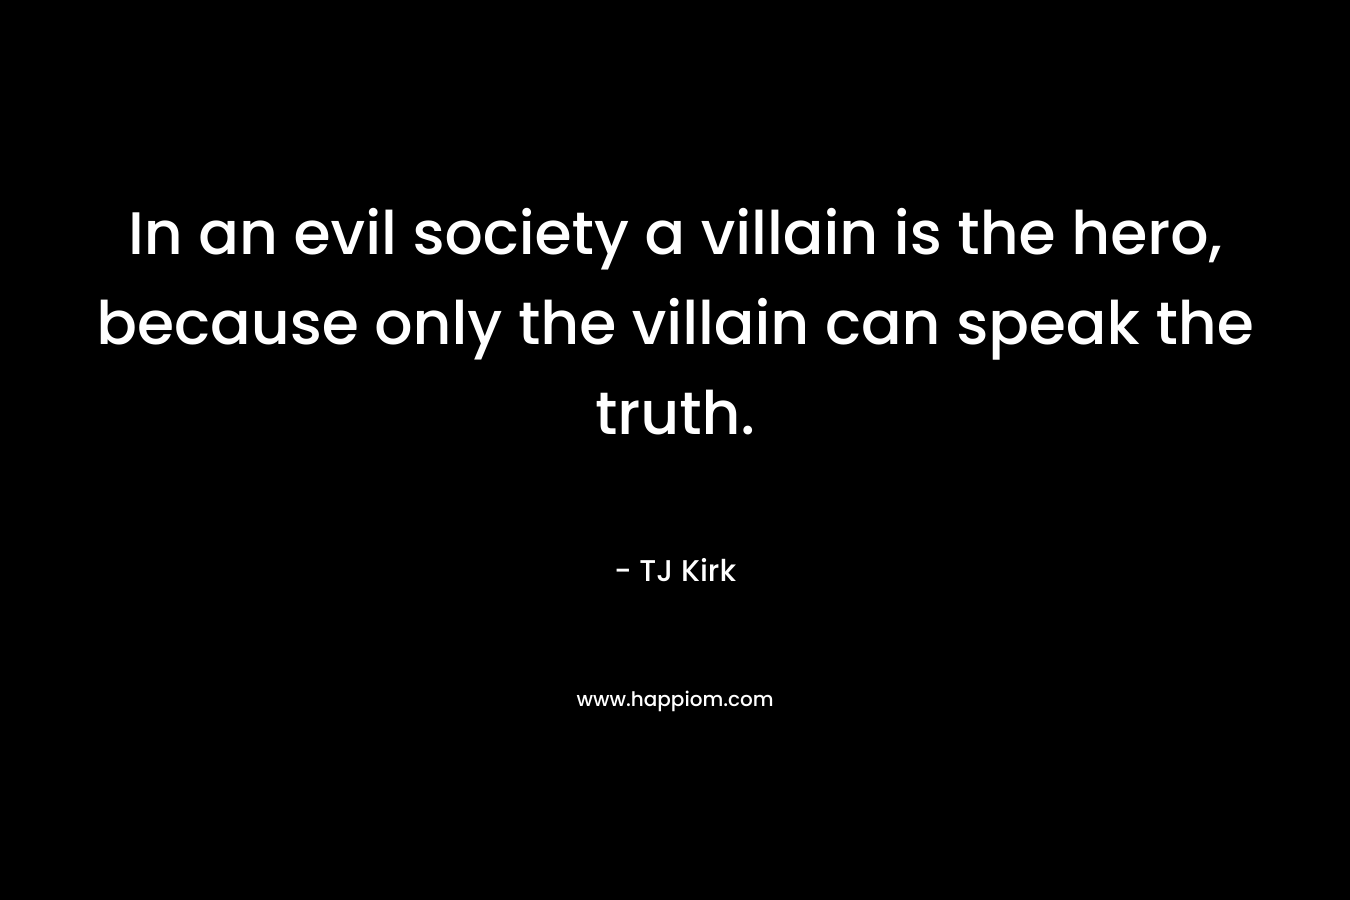 In an evil society a villain is the hero, because only the villain can speak the truth.